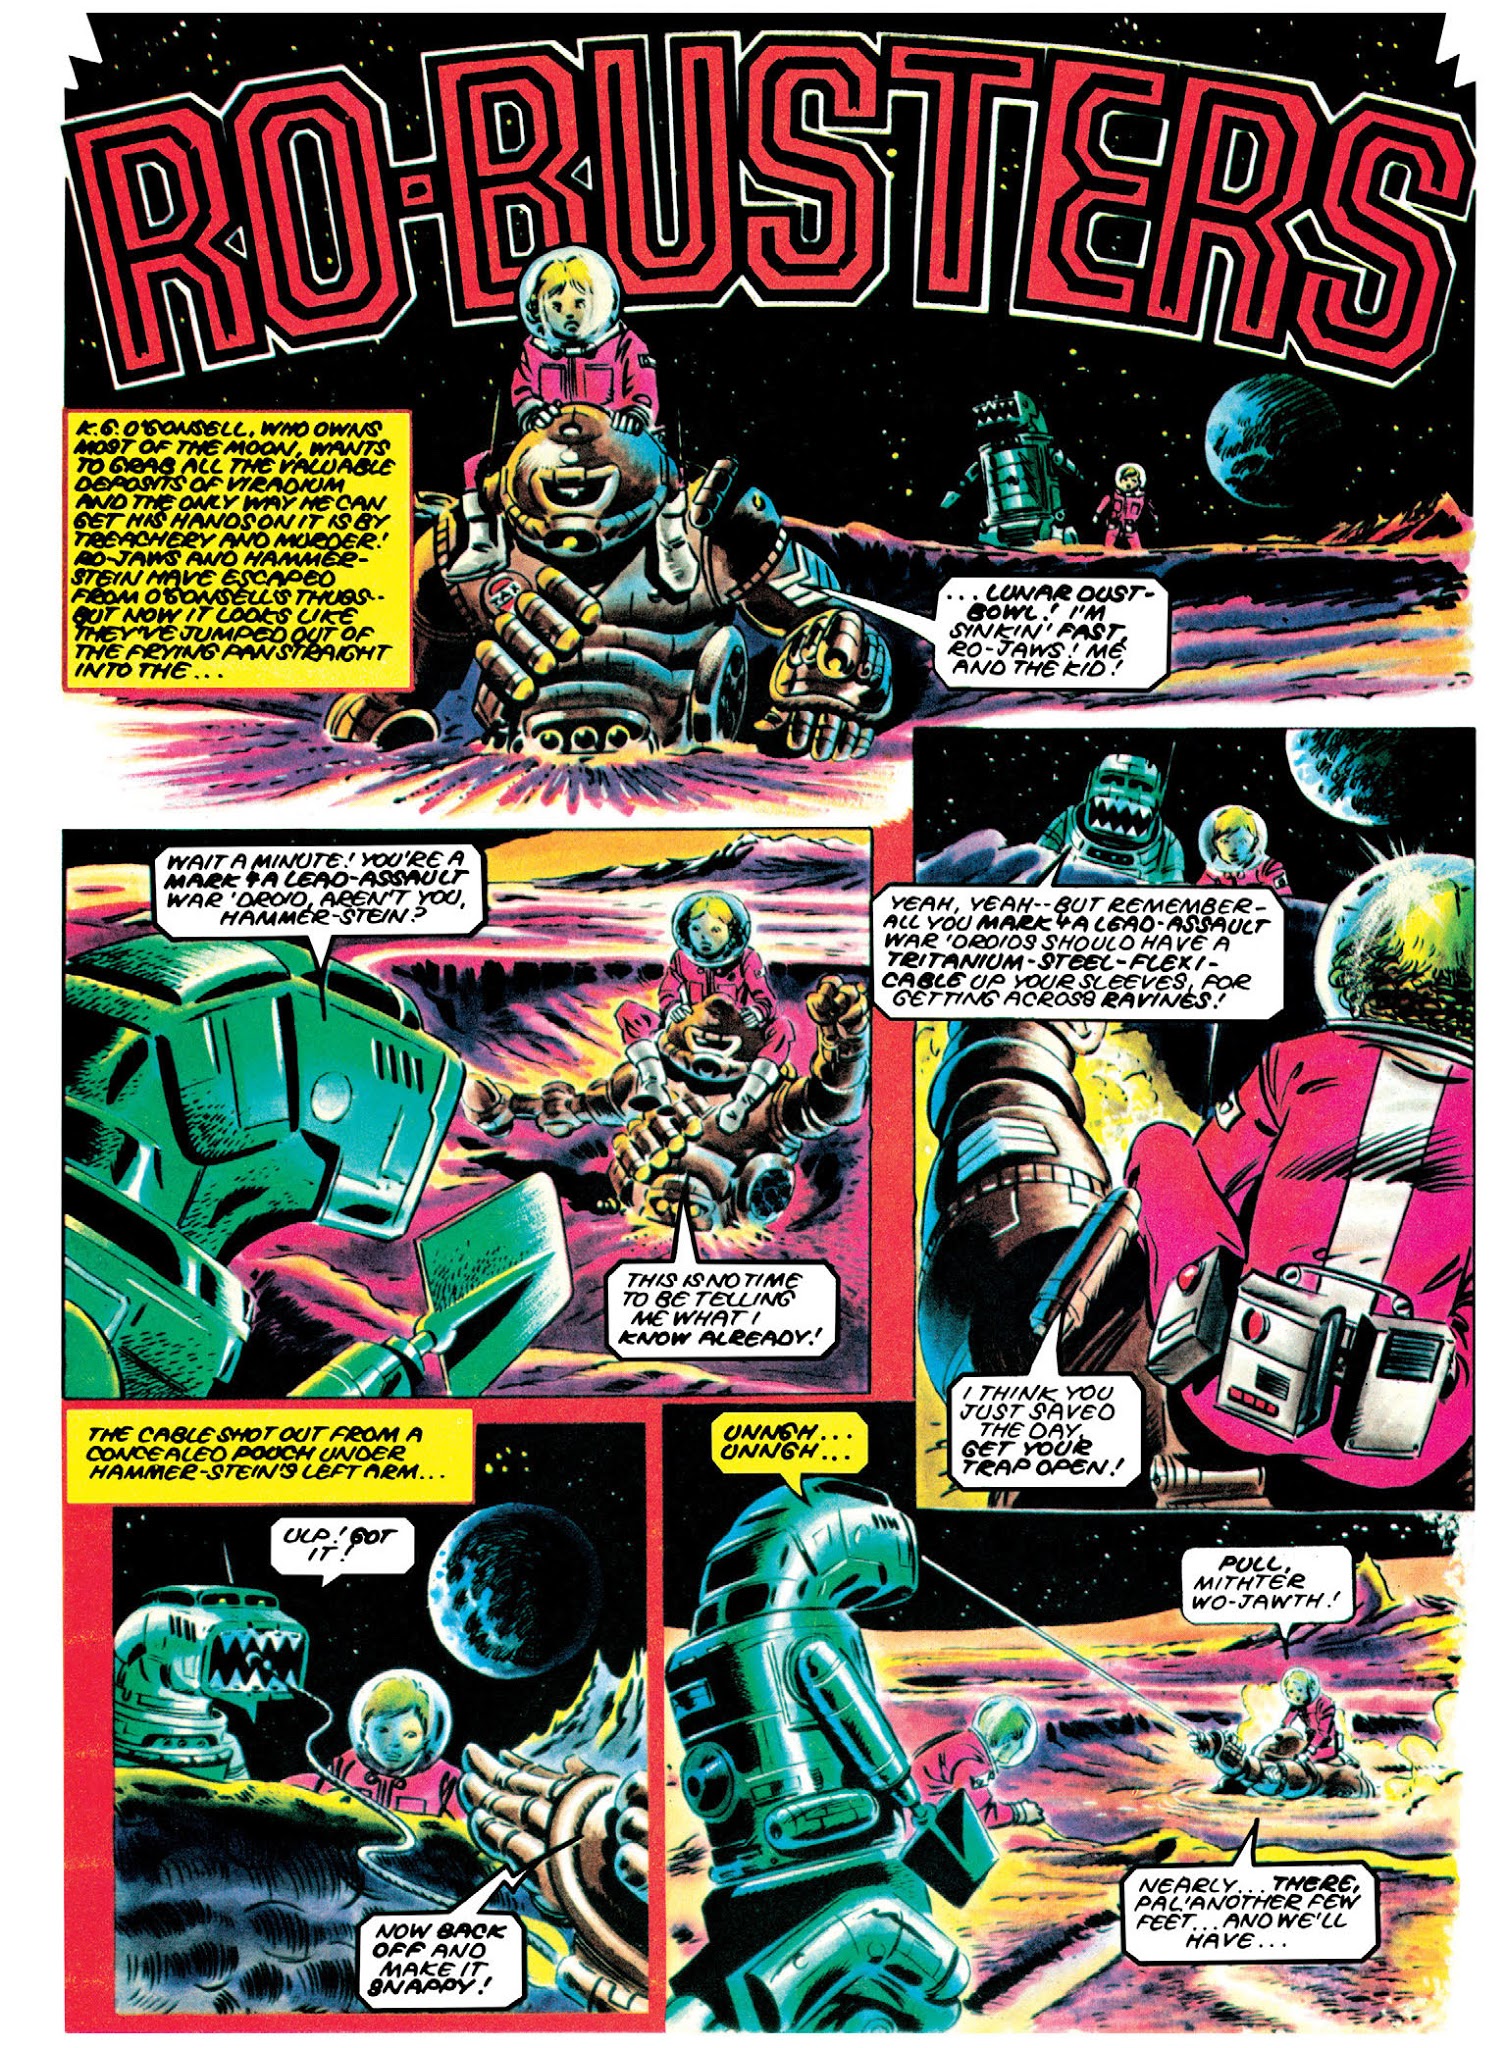 Read online Ro-Busters comic -  Issue # TPB 1 - 110